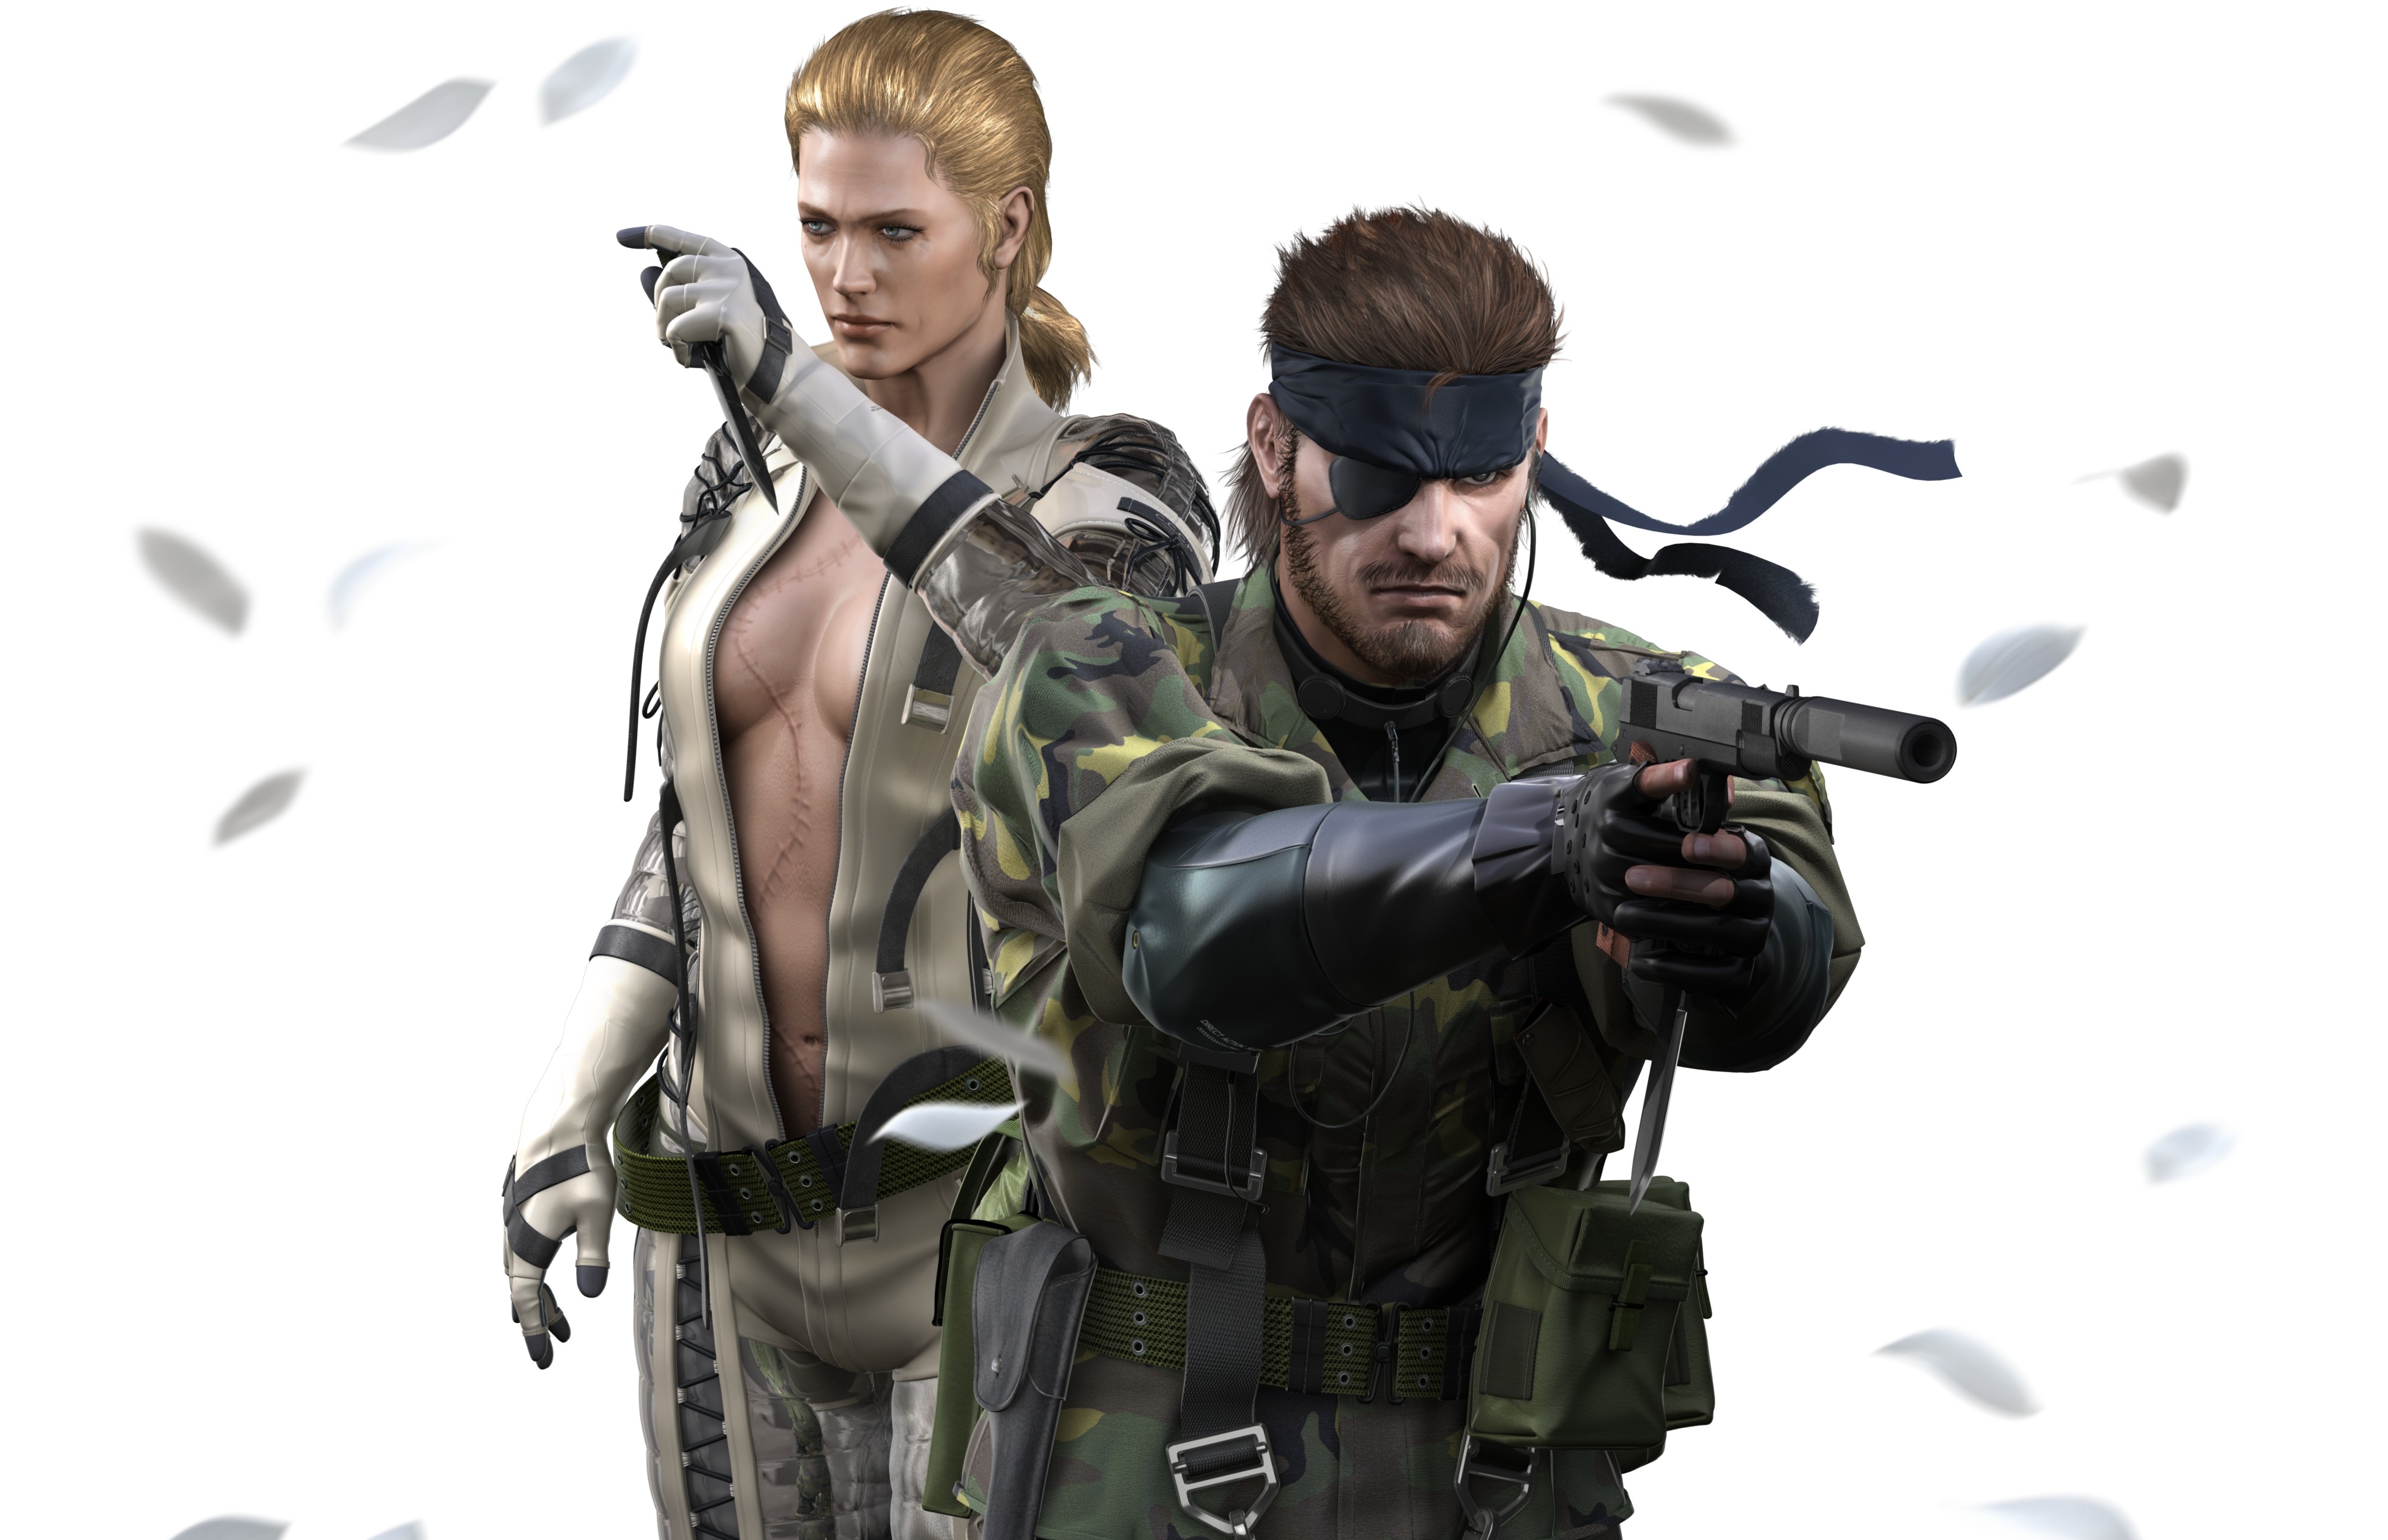 fourth Metal Gear game Archives